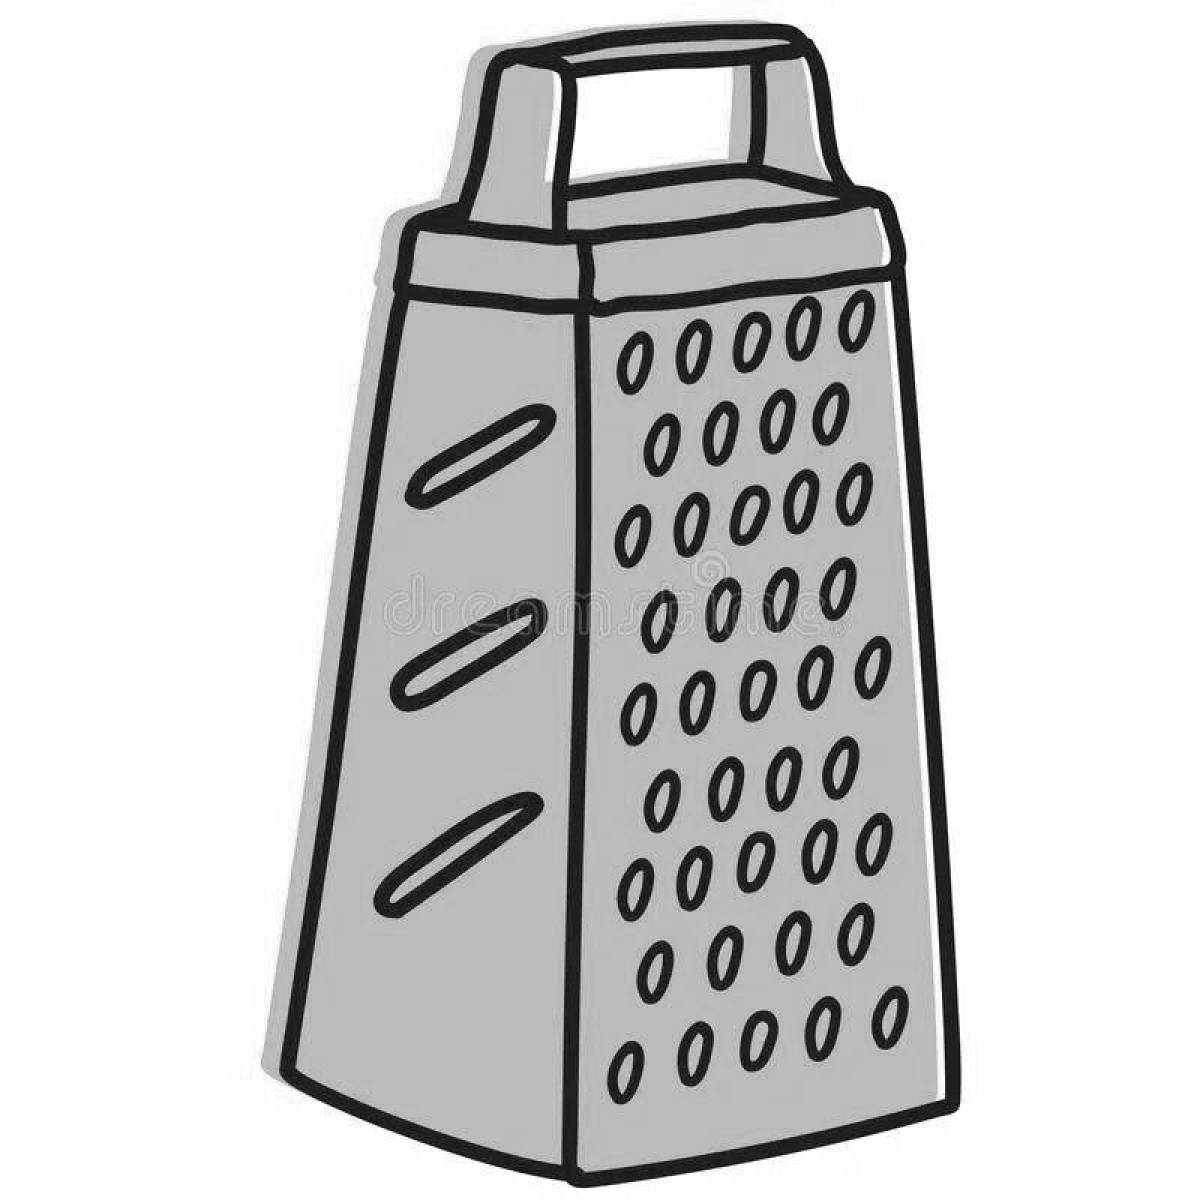 Playful grater coloring page